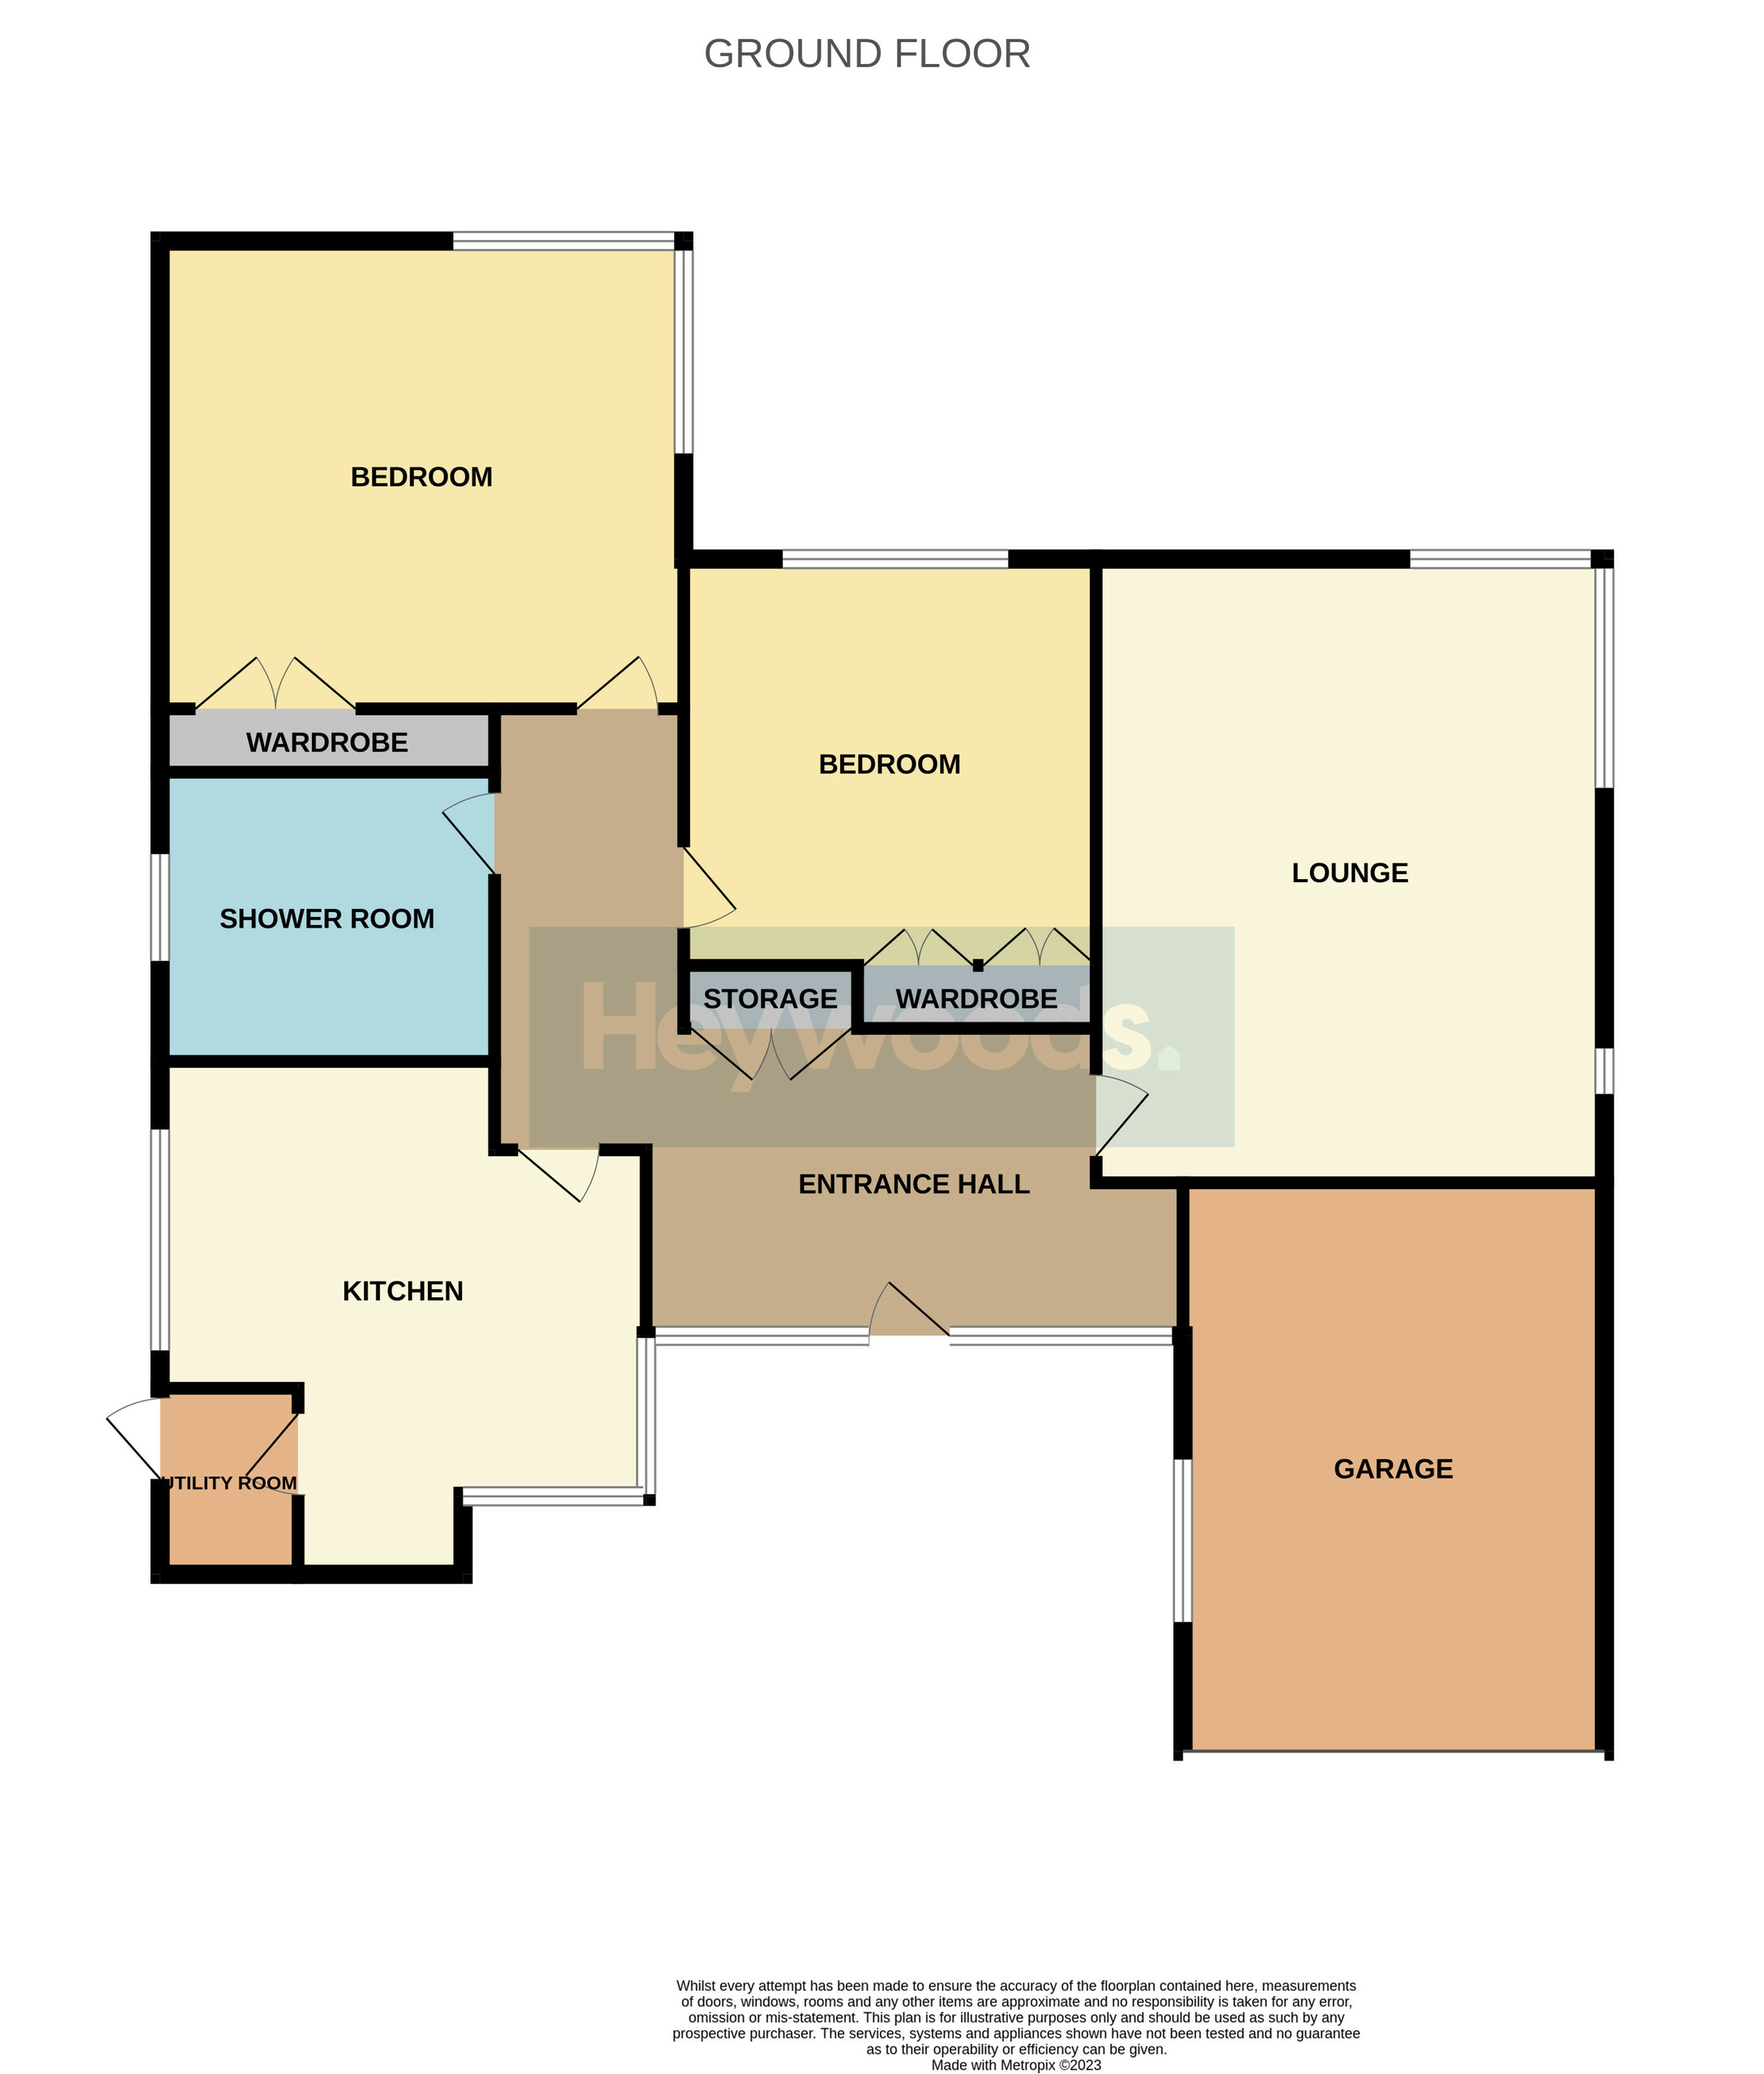 2 bed bungalow for sale in Clayton, Newcastle-under-Lyme - Property floorplan